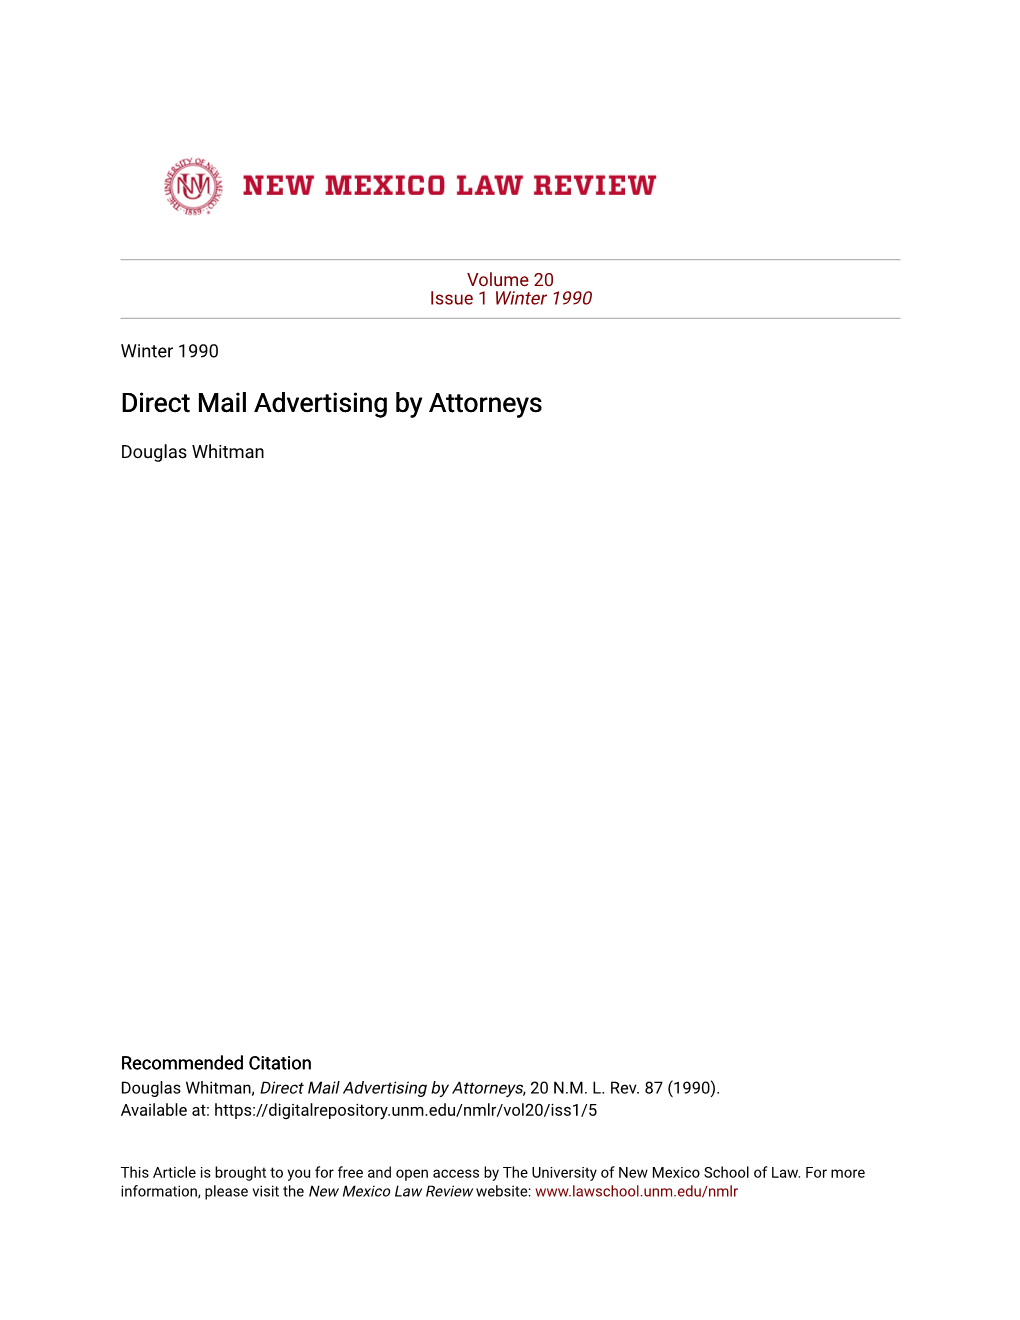 Direct Mail Advertising by Attorneys